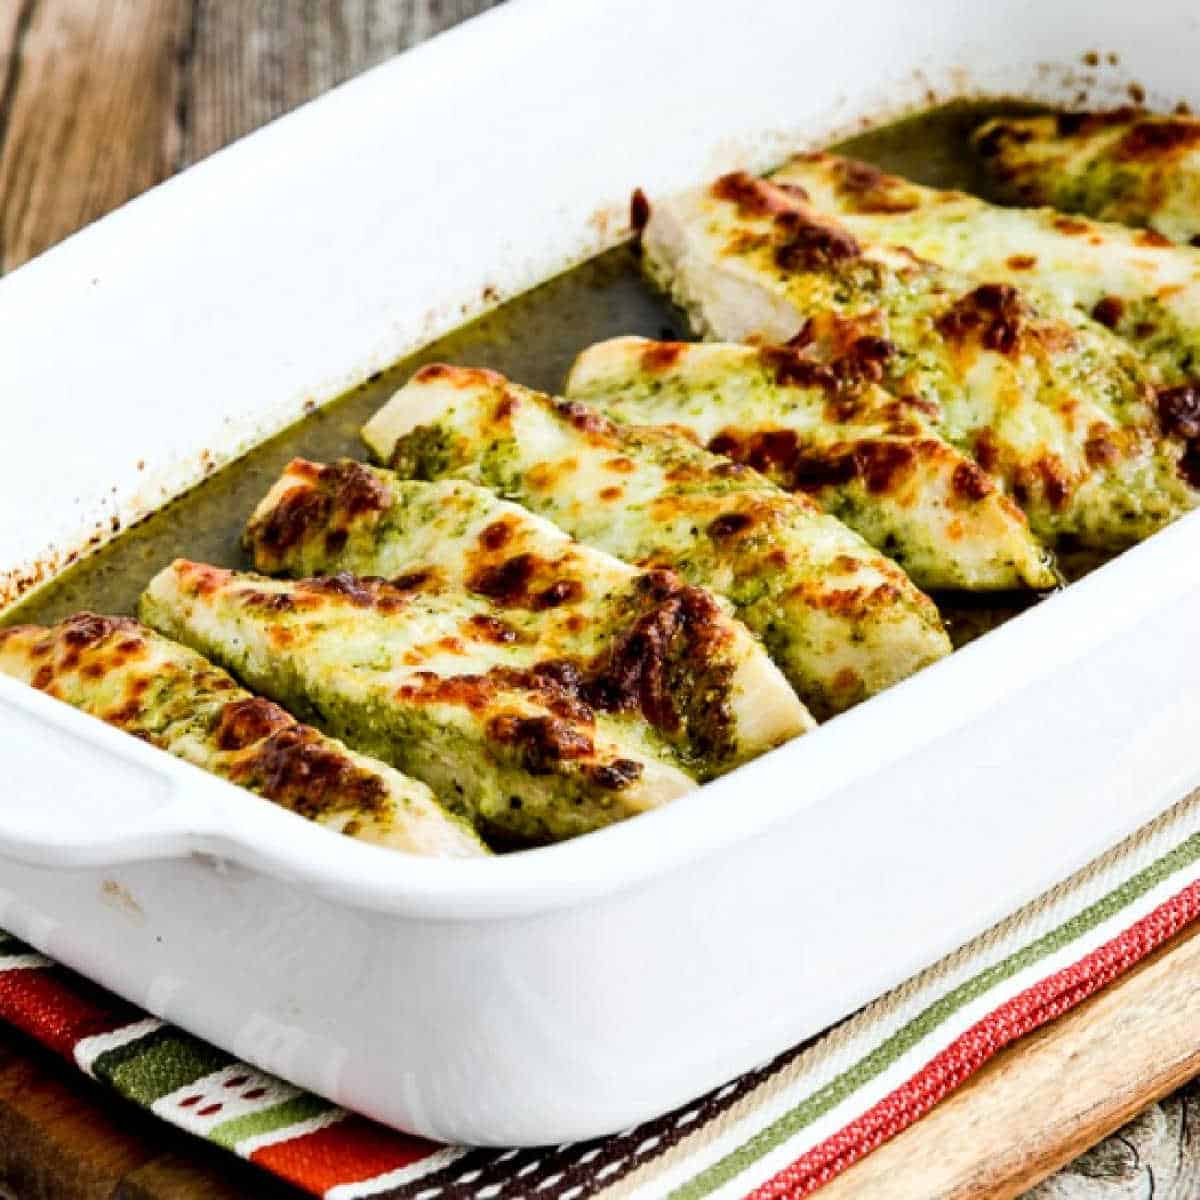 Square image of pesto chicken baked in a baking dish on a striped napkin